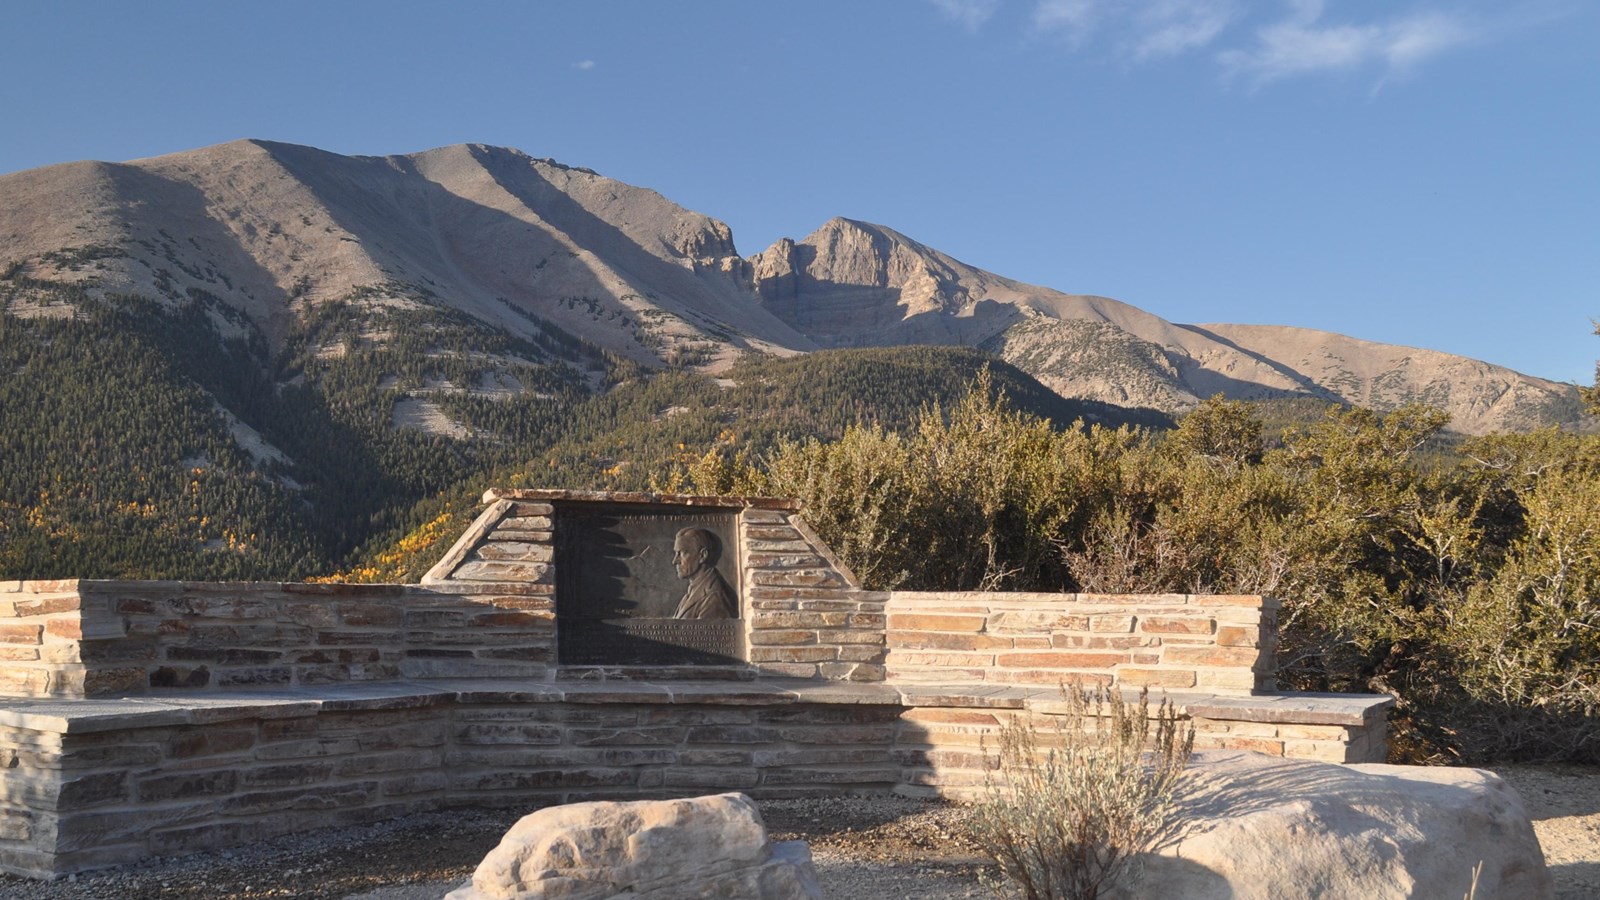 Steven Mather plaque at great Basin National Park with wheeler peak in the background.